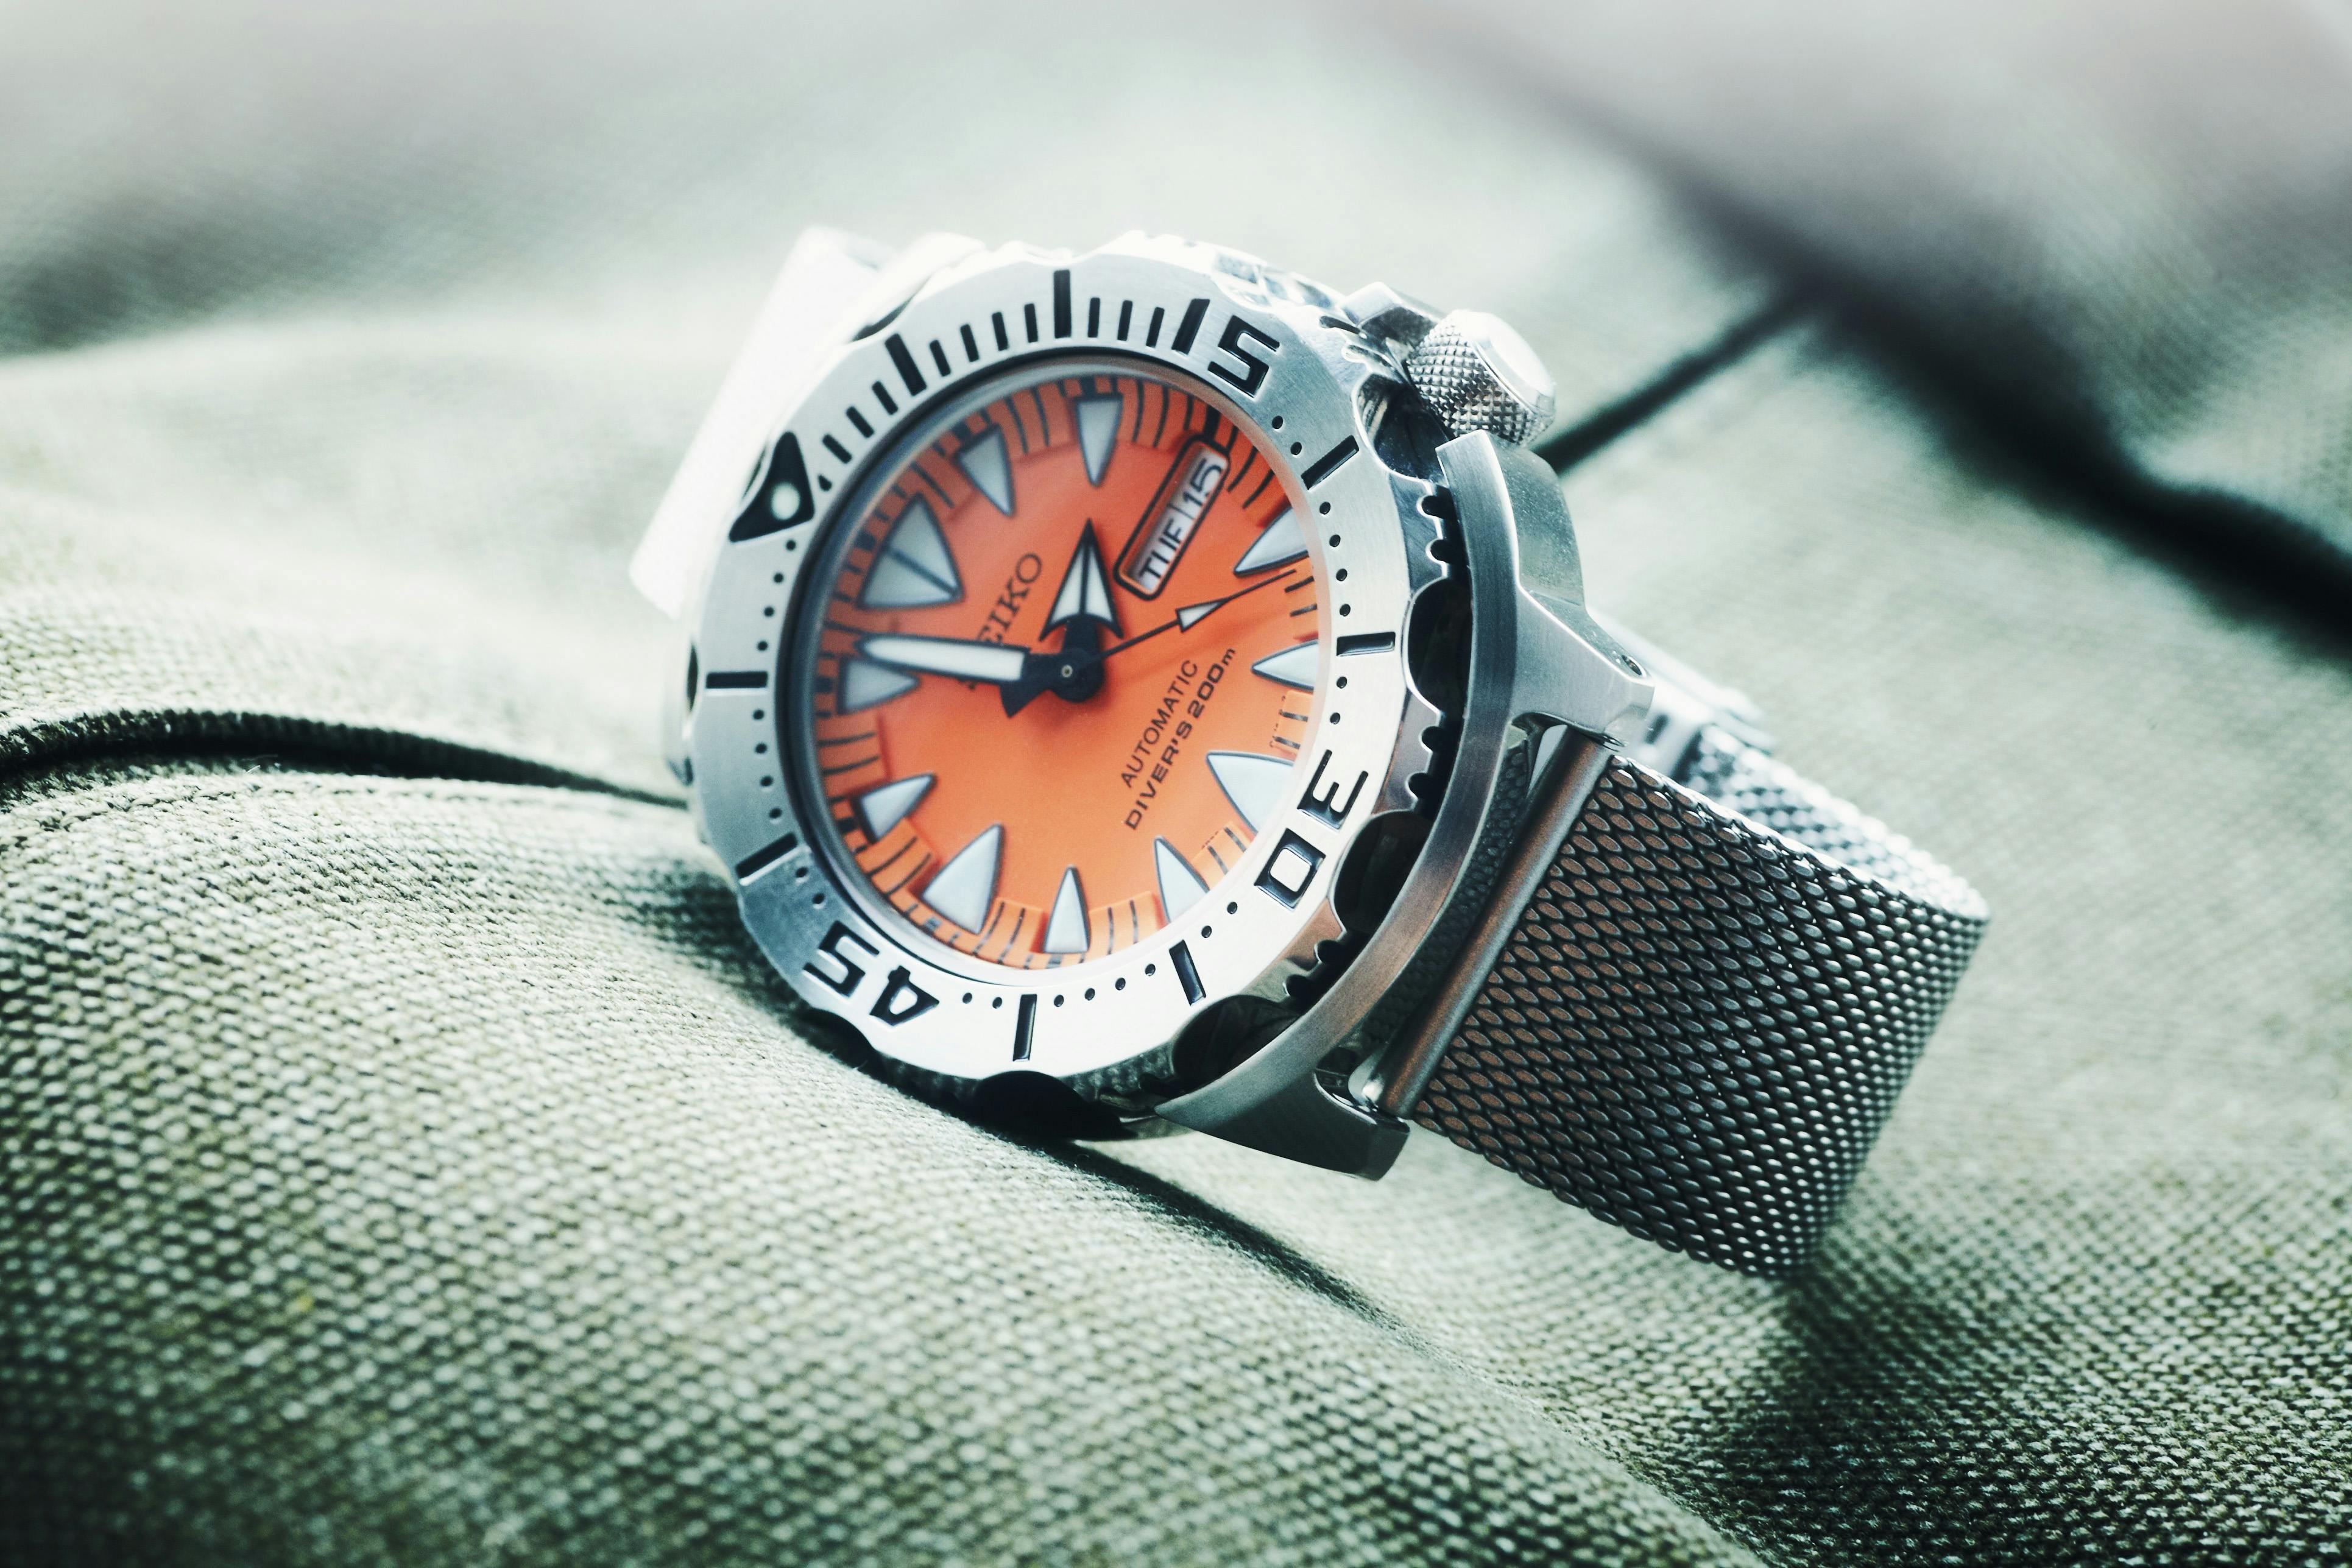 Round Orange and Silver-colored Seiko Analog Watch Showing 1:57 · Free  Stock Photo